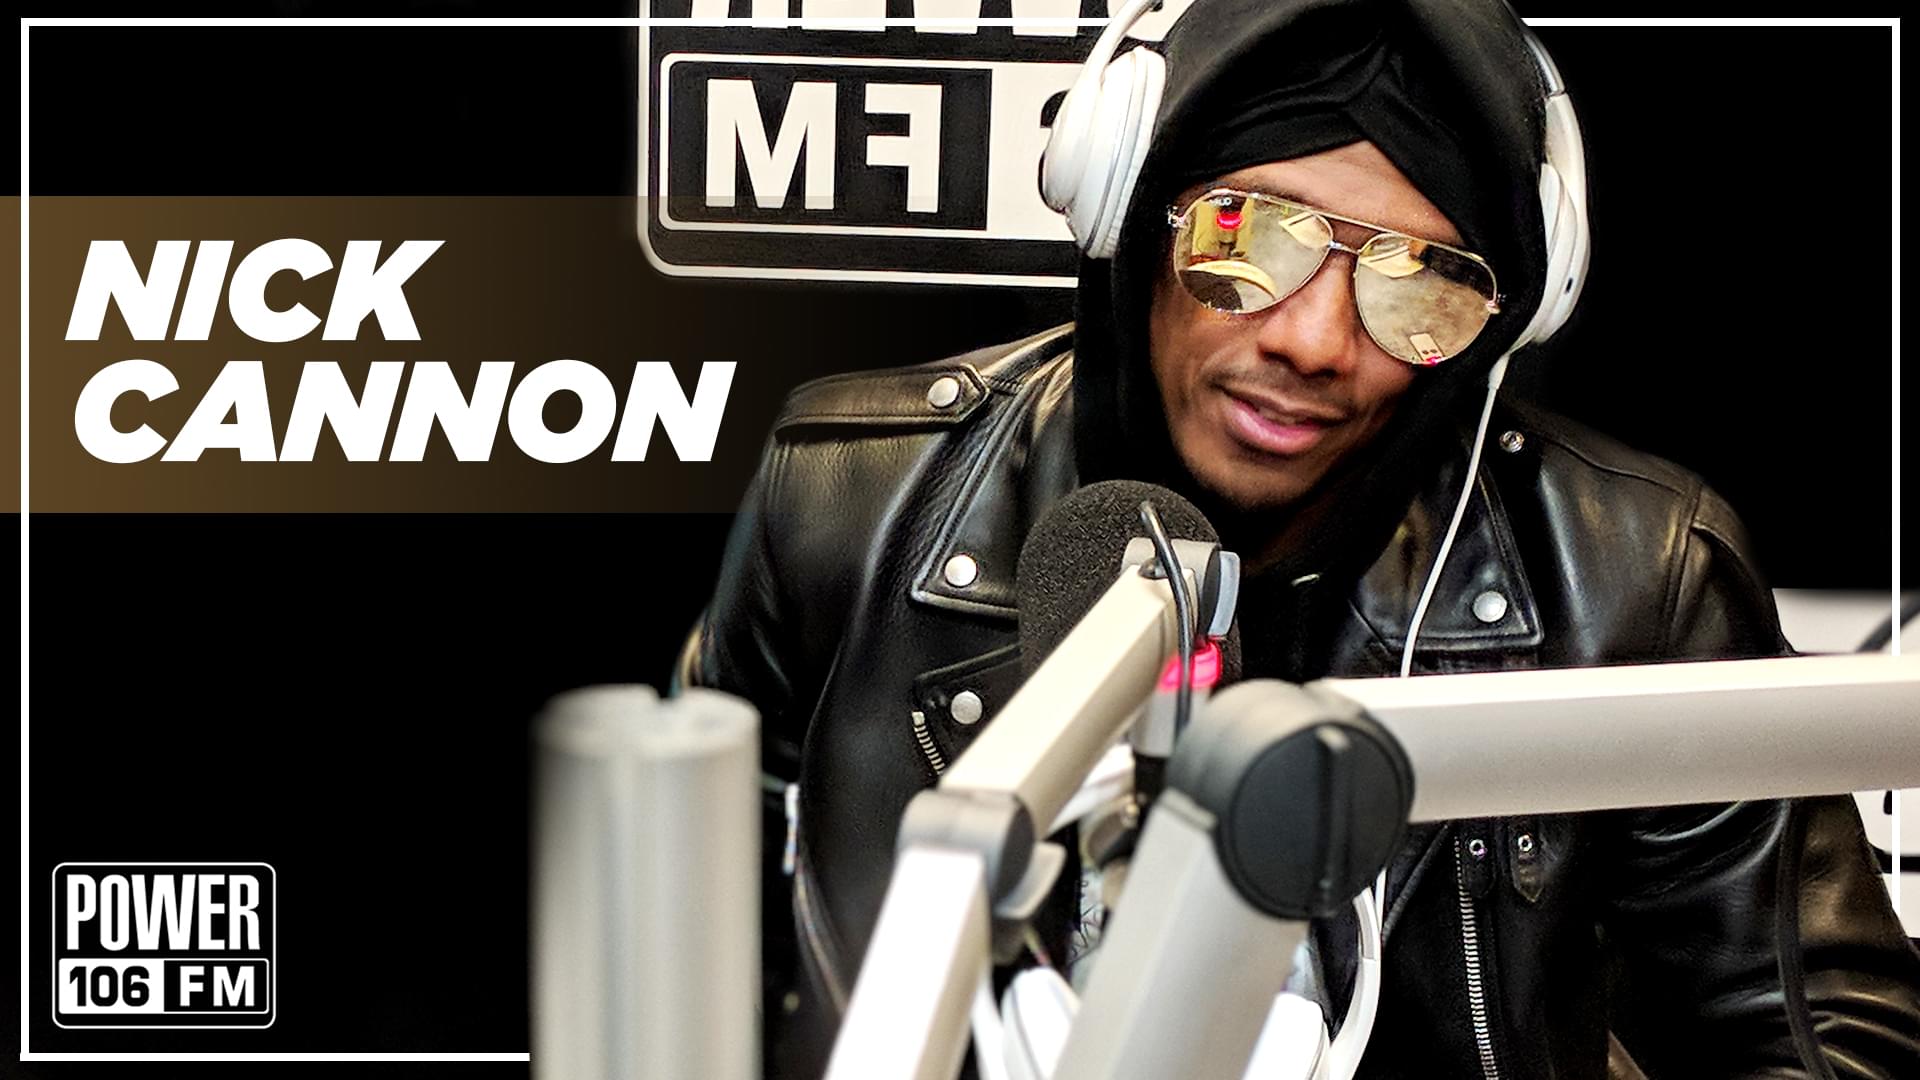 Nick Cannon Talks Soulmates vs. Being A Hoe, Wild N Out Tour, His Thoughts on Gun Rights + MORE!